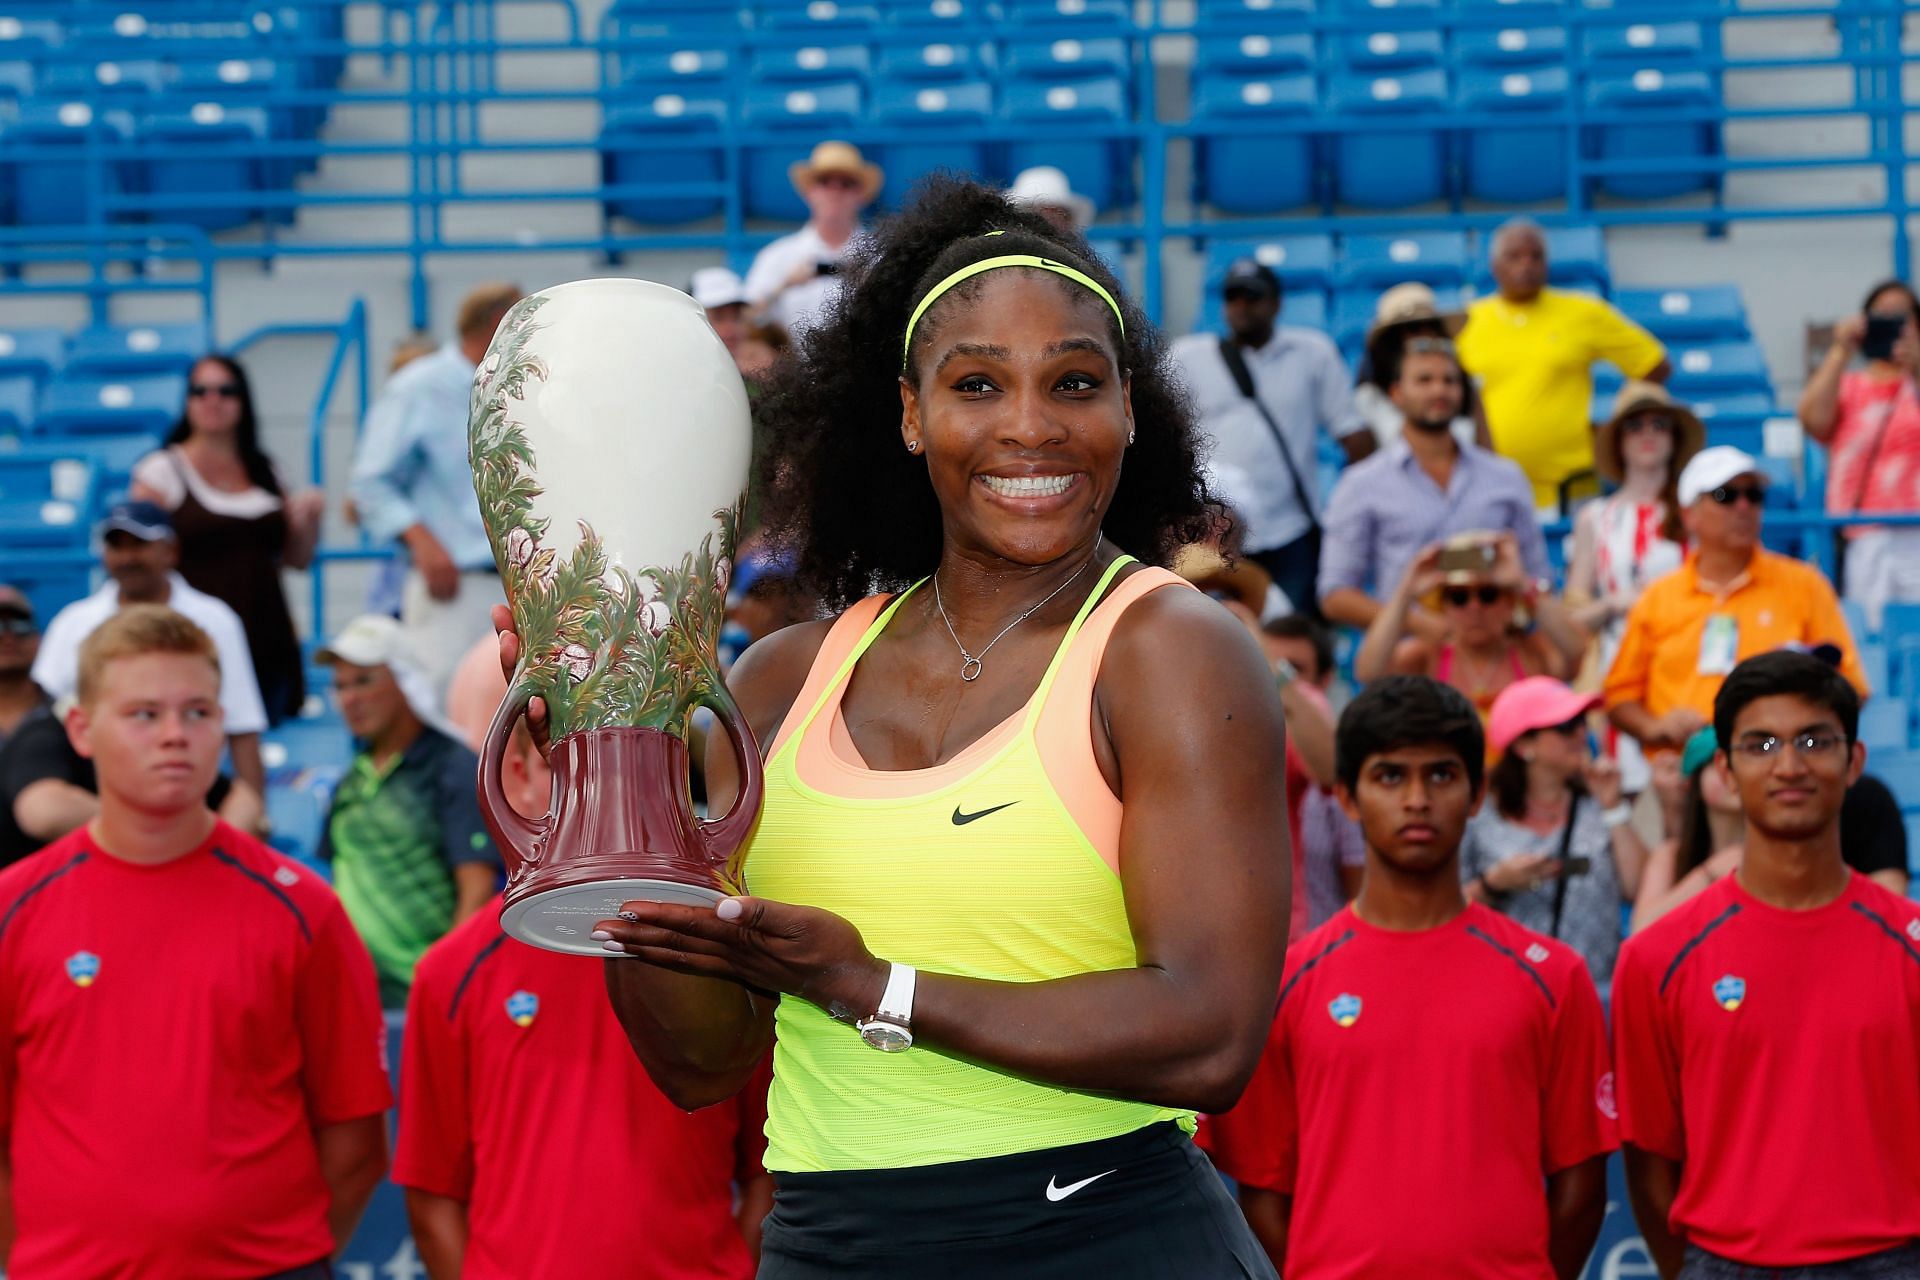 Serena Williams returns to Cincinnati after two years, to play the full